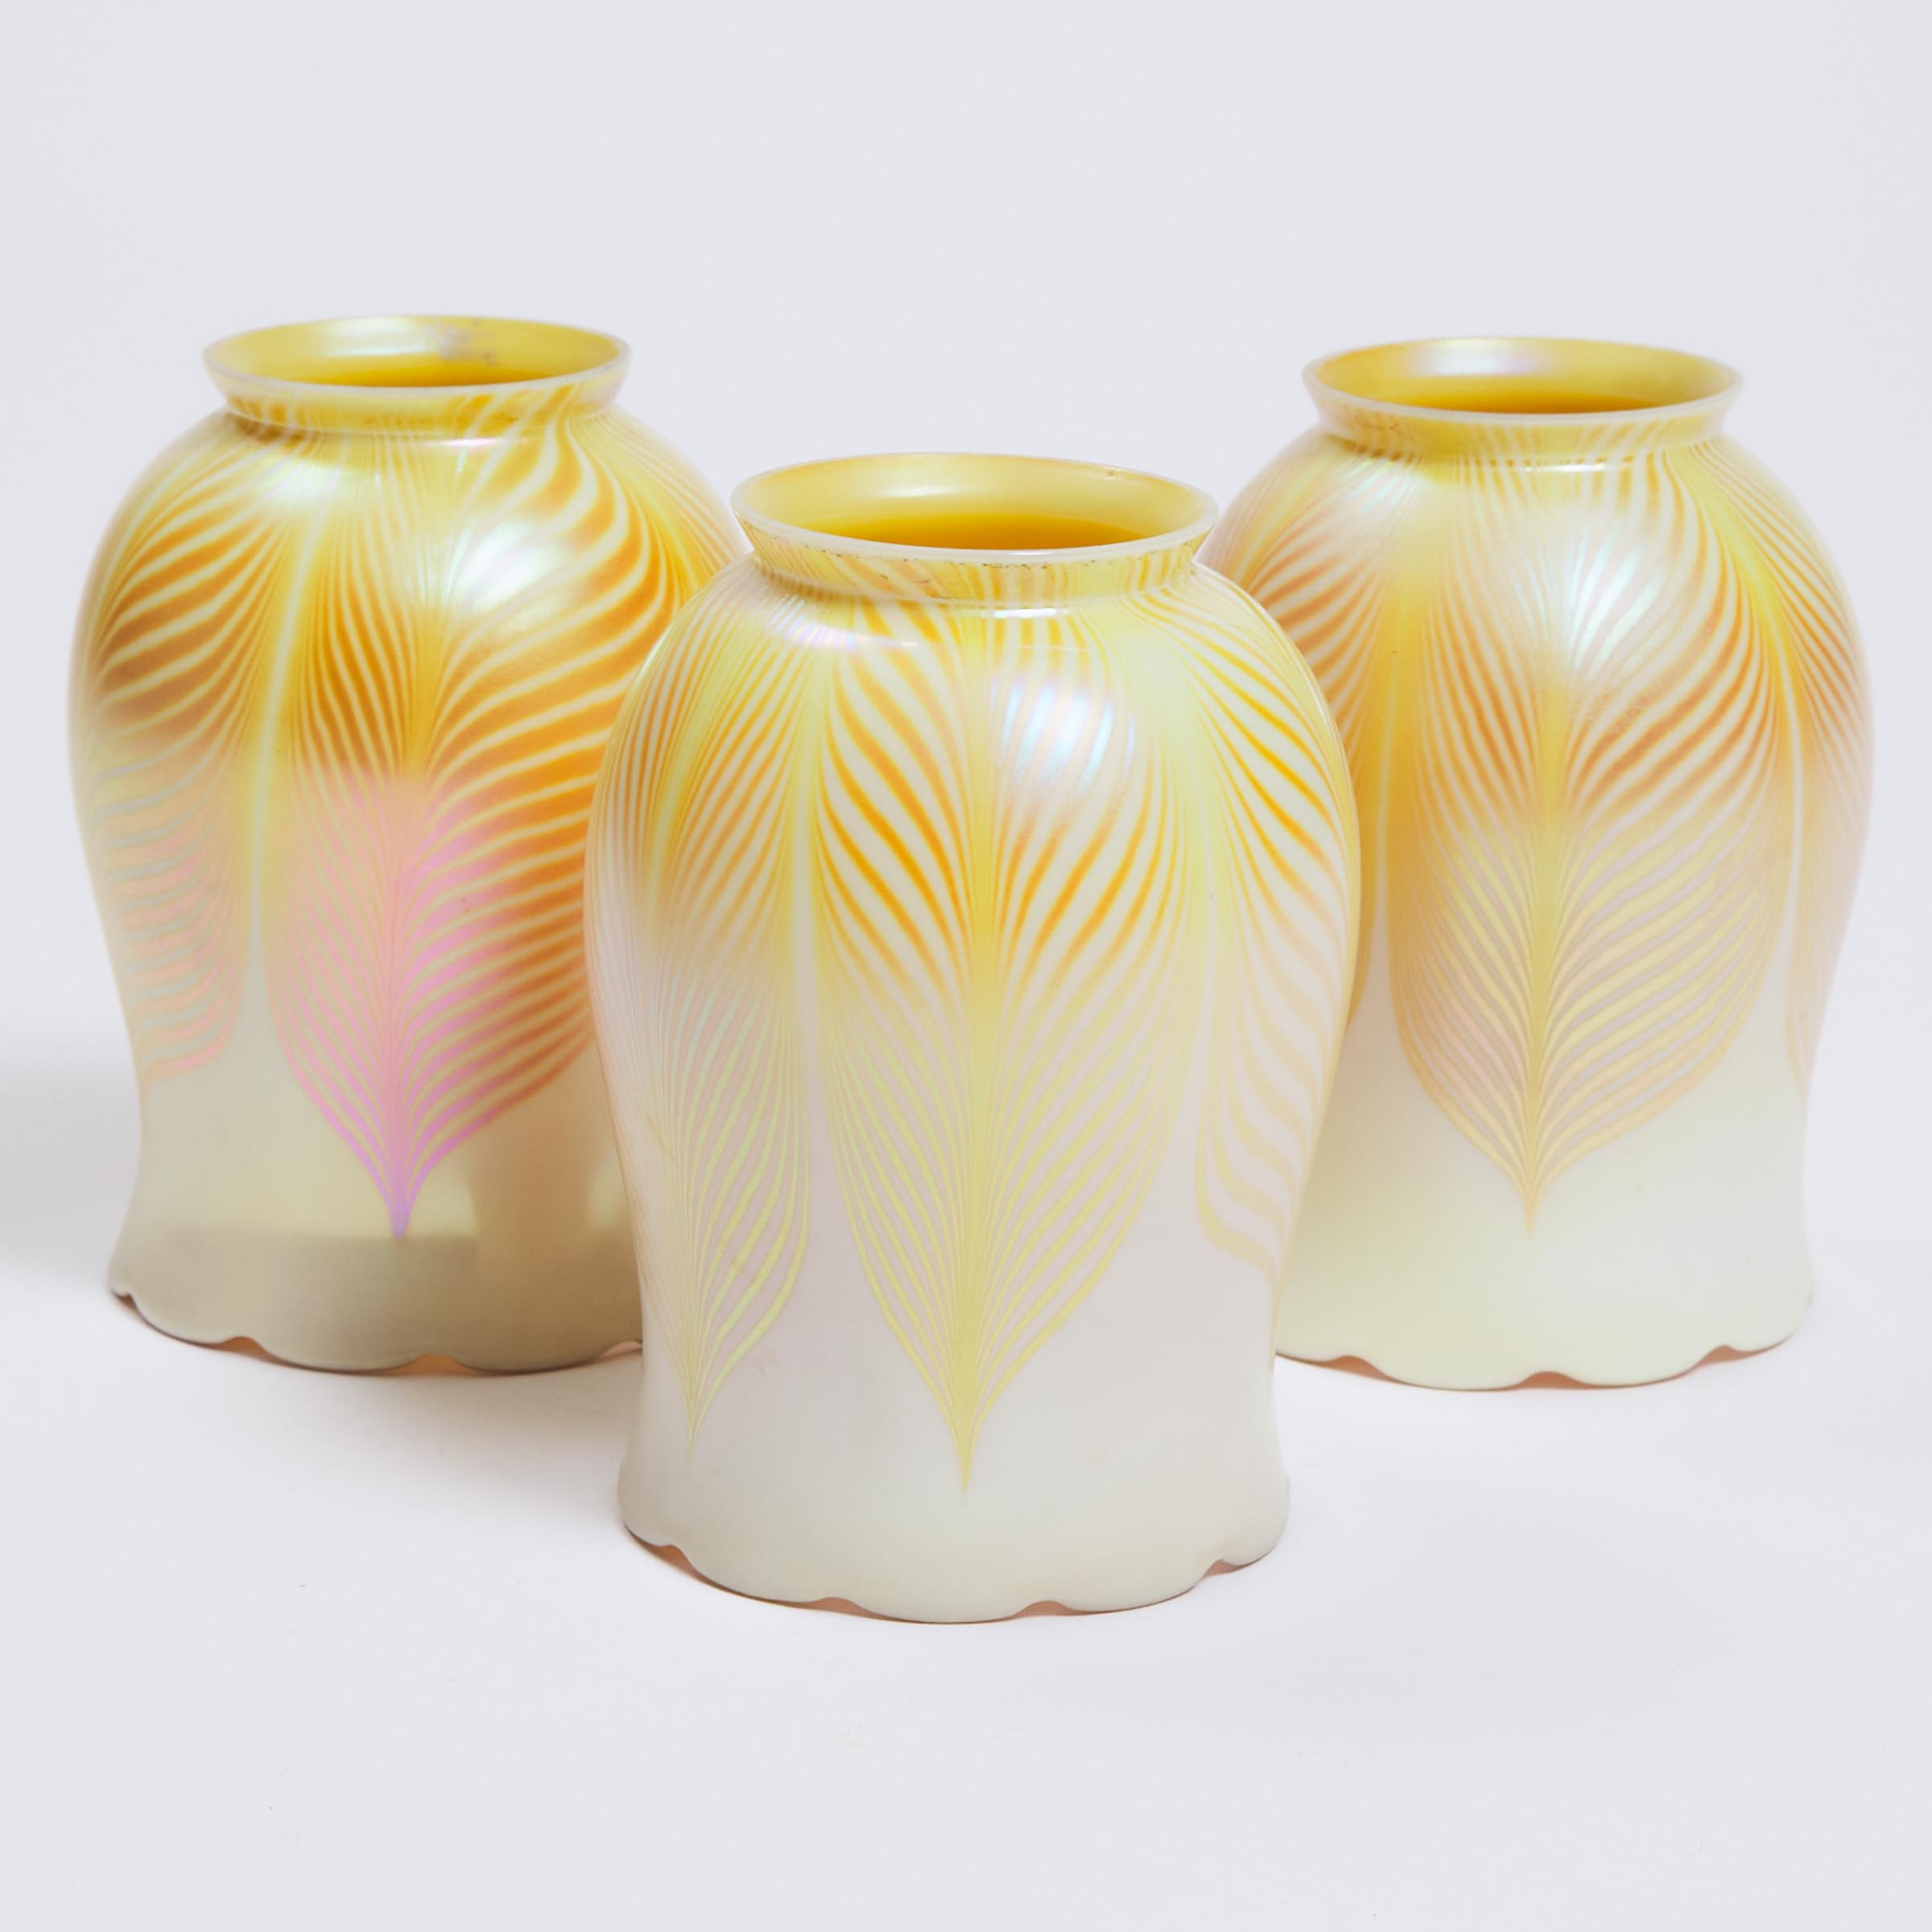 Three Steuben Decorated Iridescent Glass Shades, early 20th century